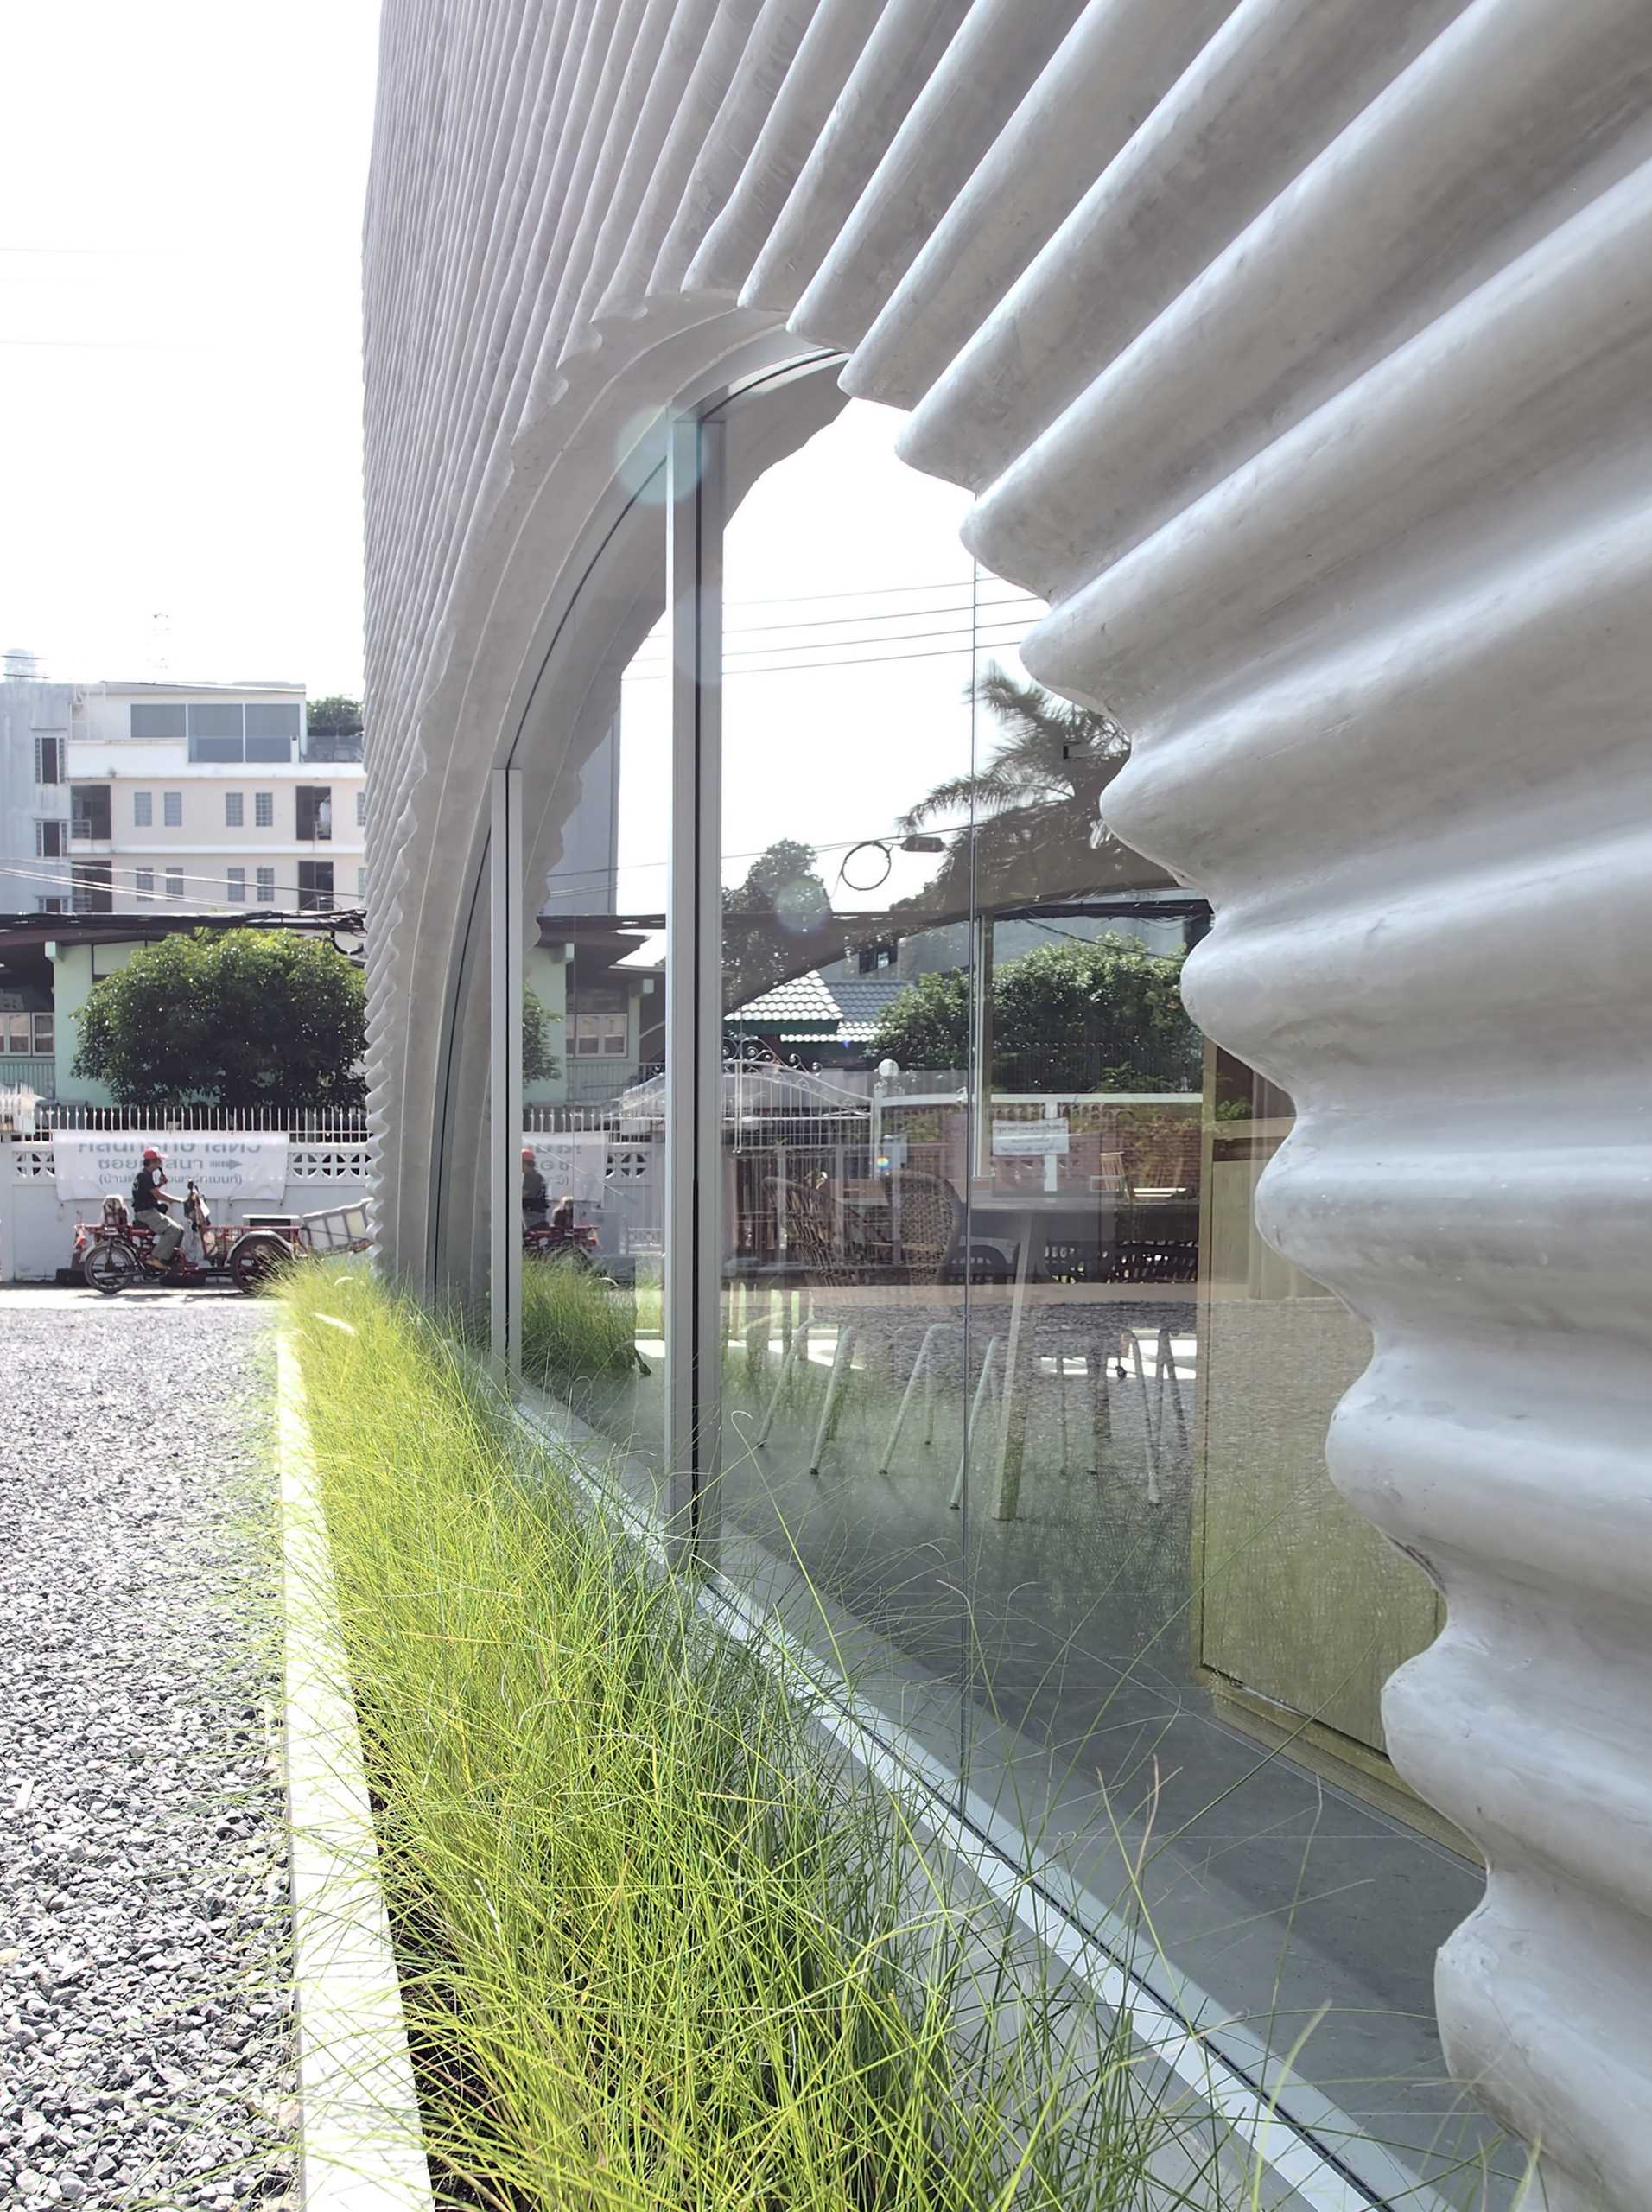 A modern restaurant and cafe with a wavy pre-case concrete facade and arched openings.